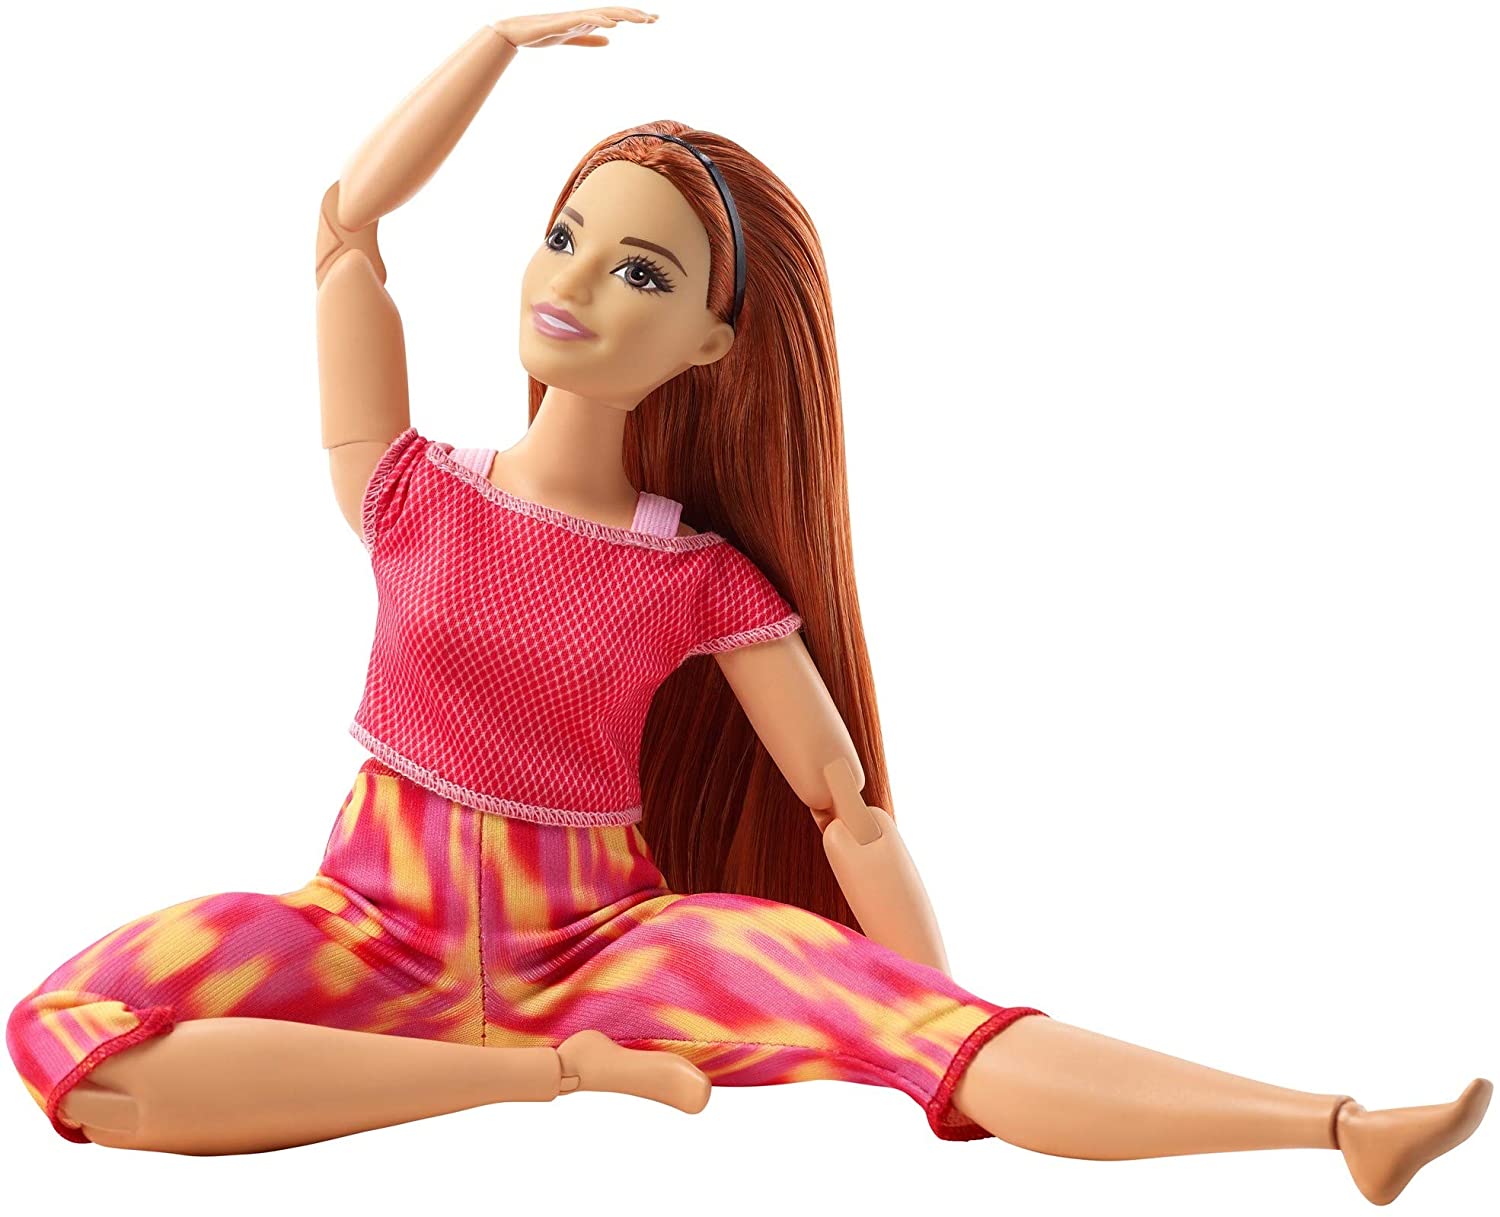 Stock photos of the new Yoga made to move Barbies. What are y'all thoughts?  : r/Dolls